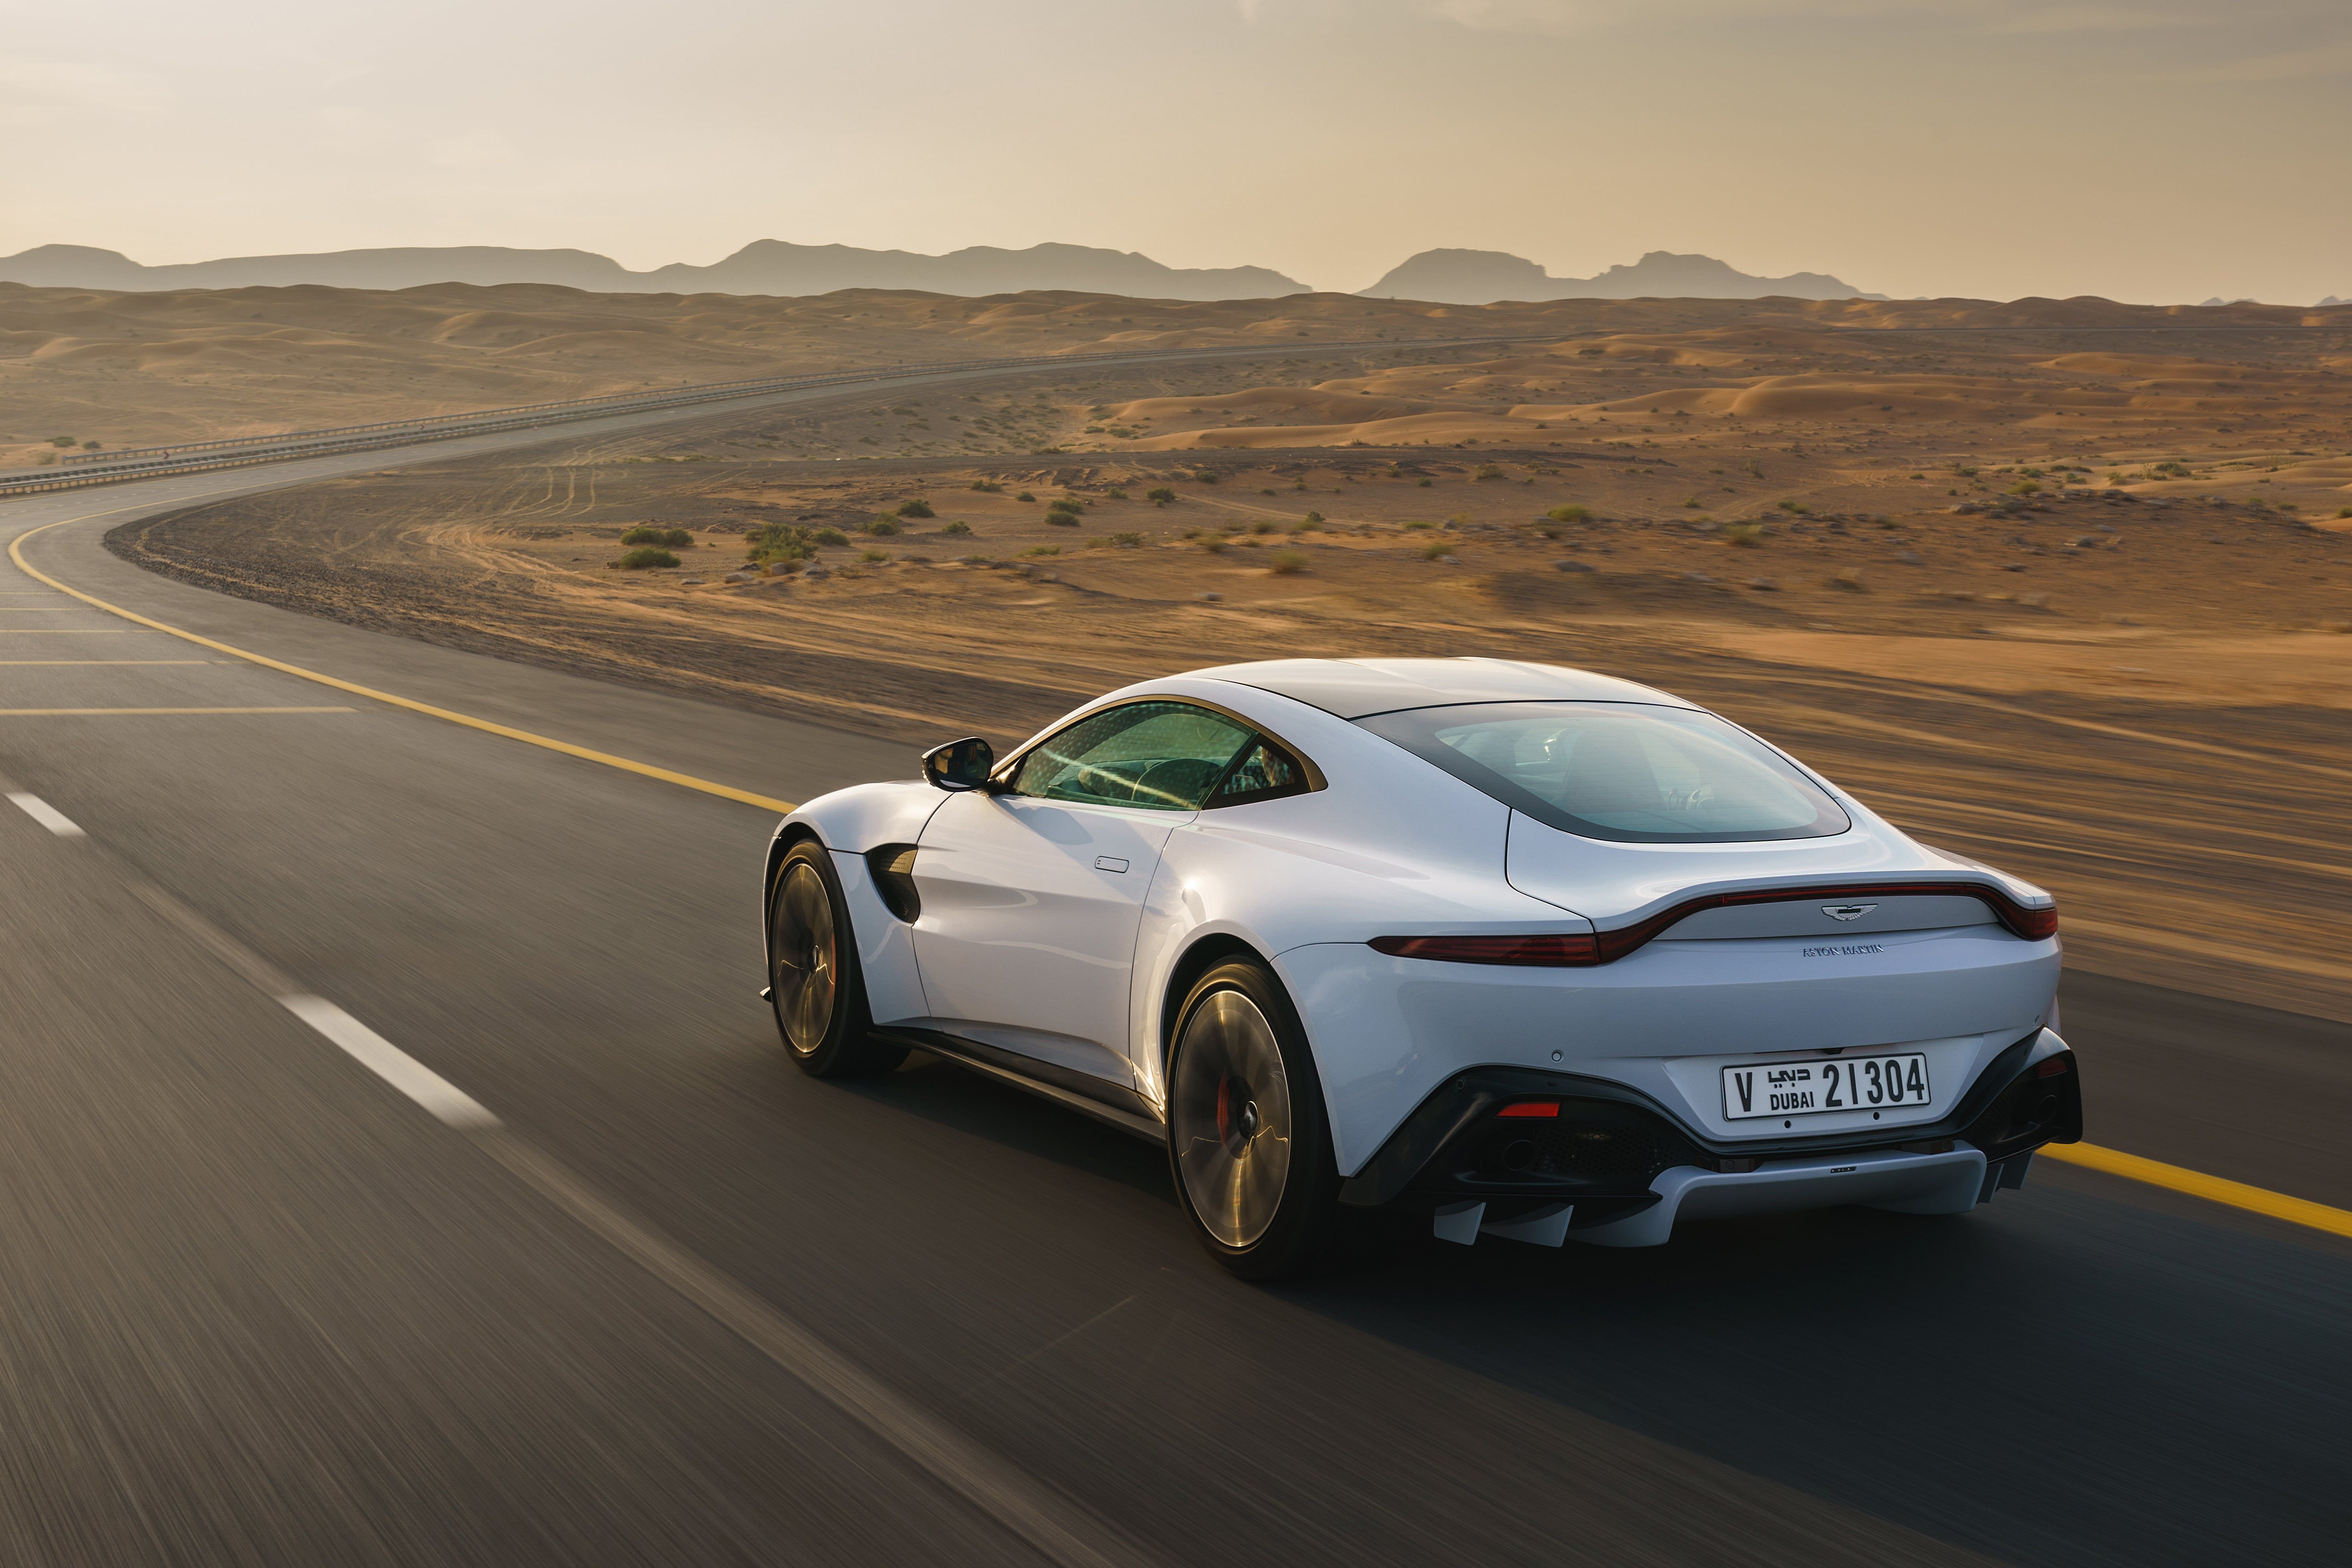 Images Of Aston Martin Cars